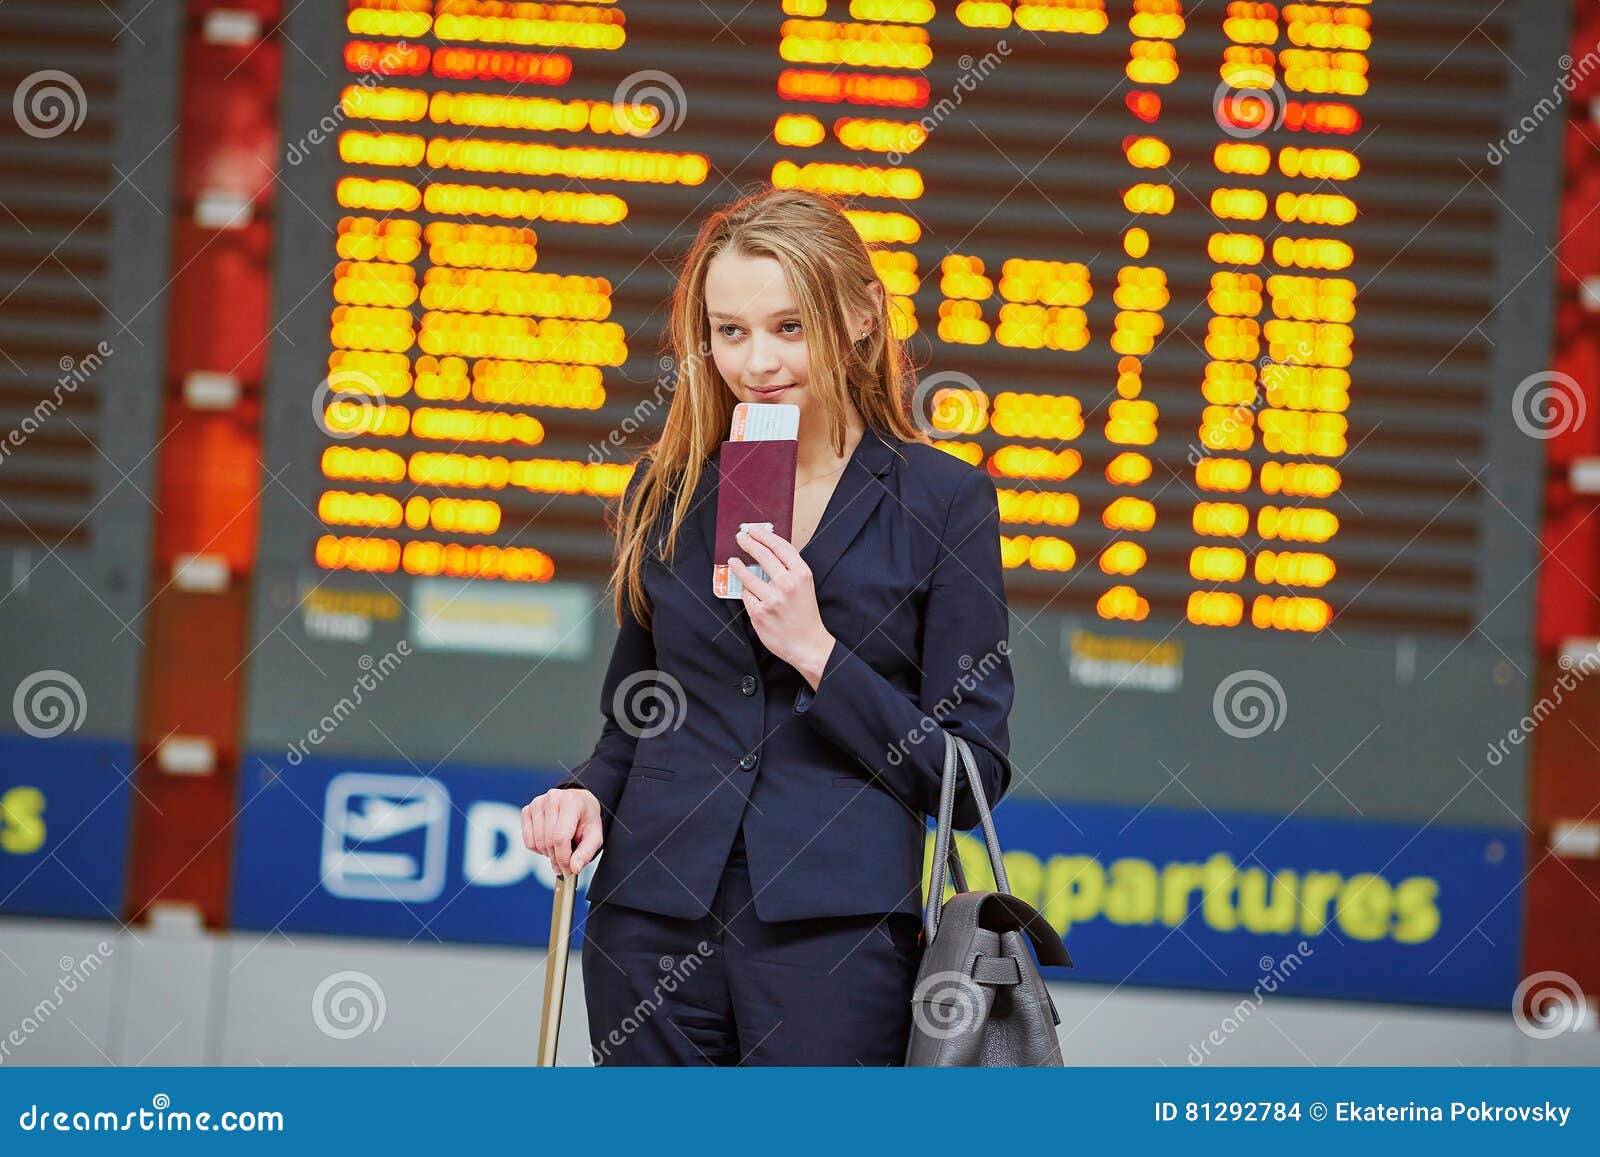 Young woman in international airport looking at the flight information board, checking her flight. Young elegant business woman with hand luggage in international airport terminal, looking at information board, checking her flight. Cabin crew member with suitcase.